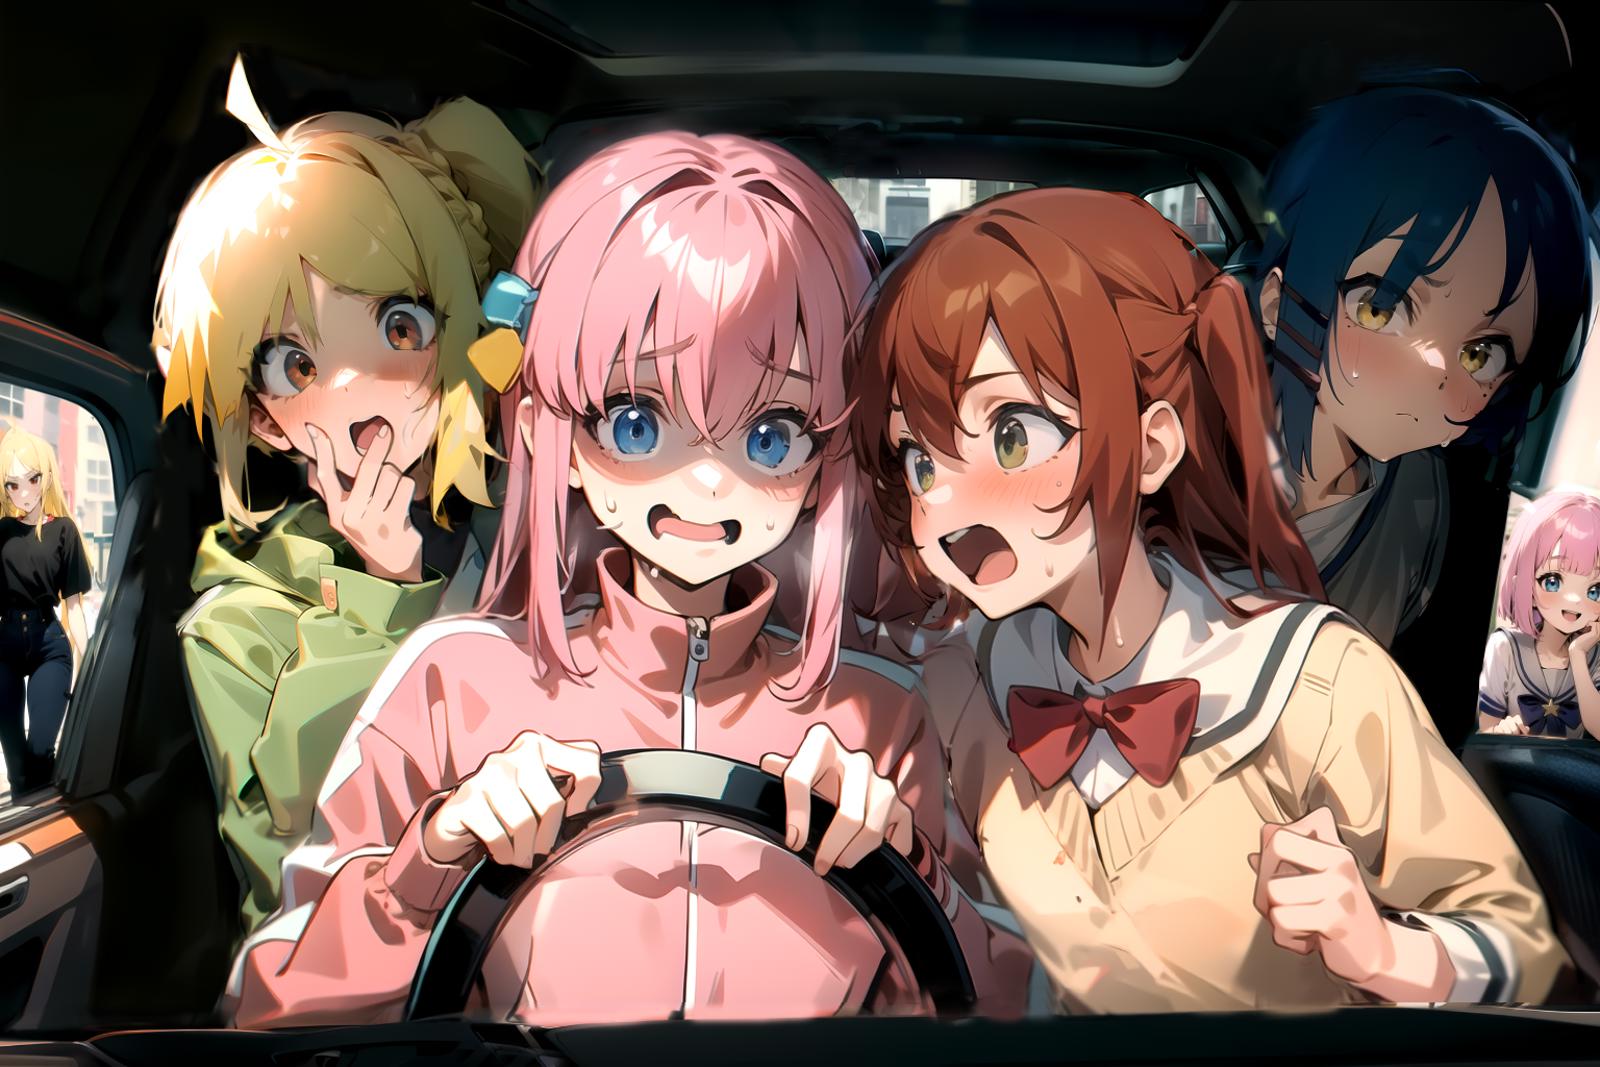 An anime drawing of women in a car with one of them driving.